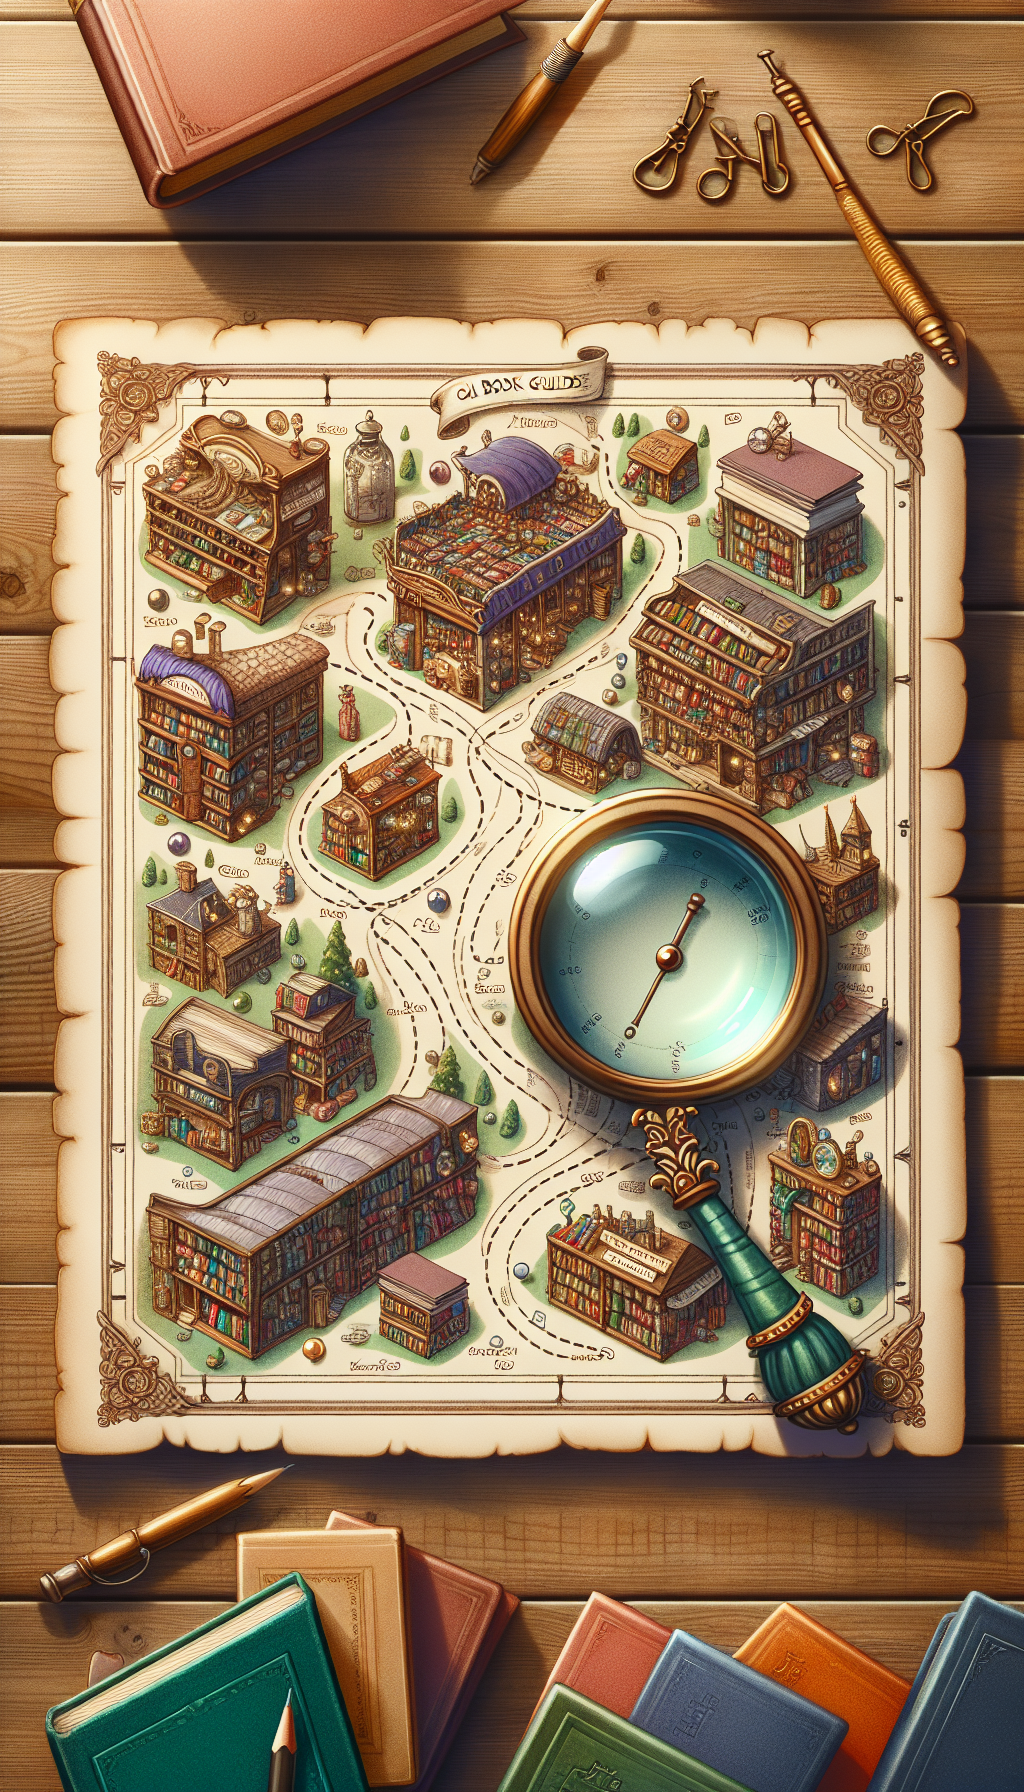 An illustration of a whimsical treasure map unfurling across a wooden table, with iconic landmarks such as an antique bookstore, a cozy reading nook, and a bustling flea market. Routes marked by dotted lines lead to each location, where tiny, gleaming books are hidden. Atop the map rests an ornate magnifying glass highlighting the words "Old Book Value Guide."